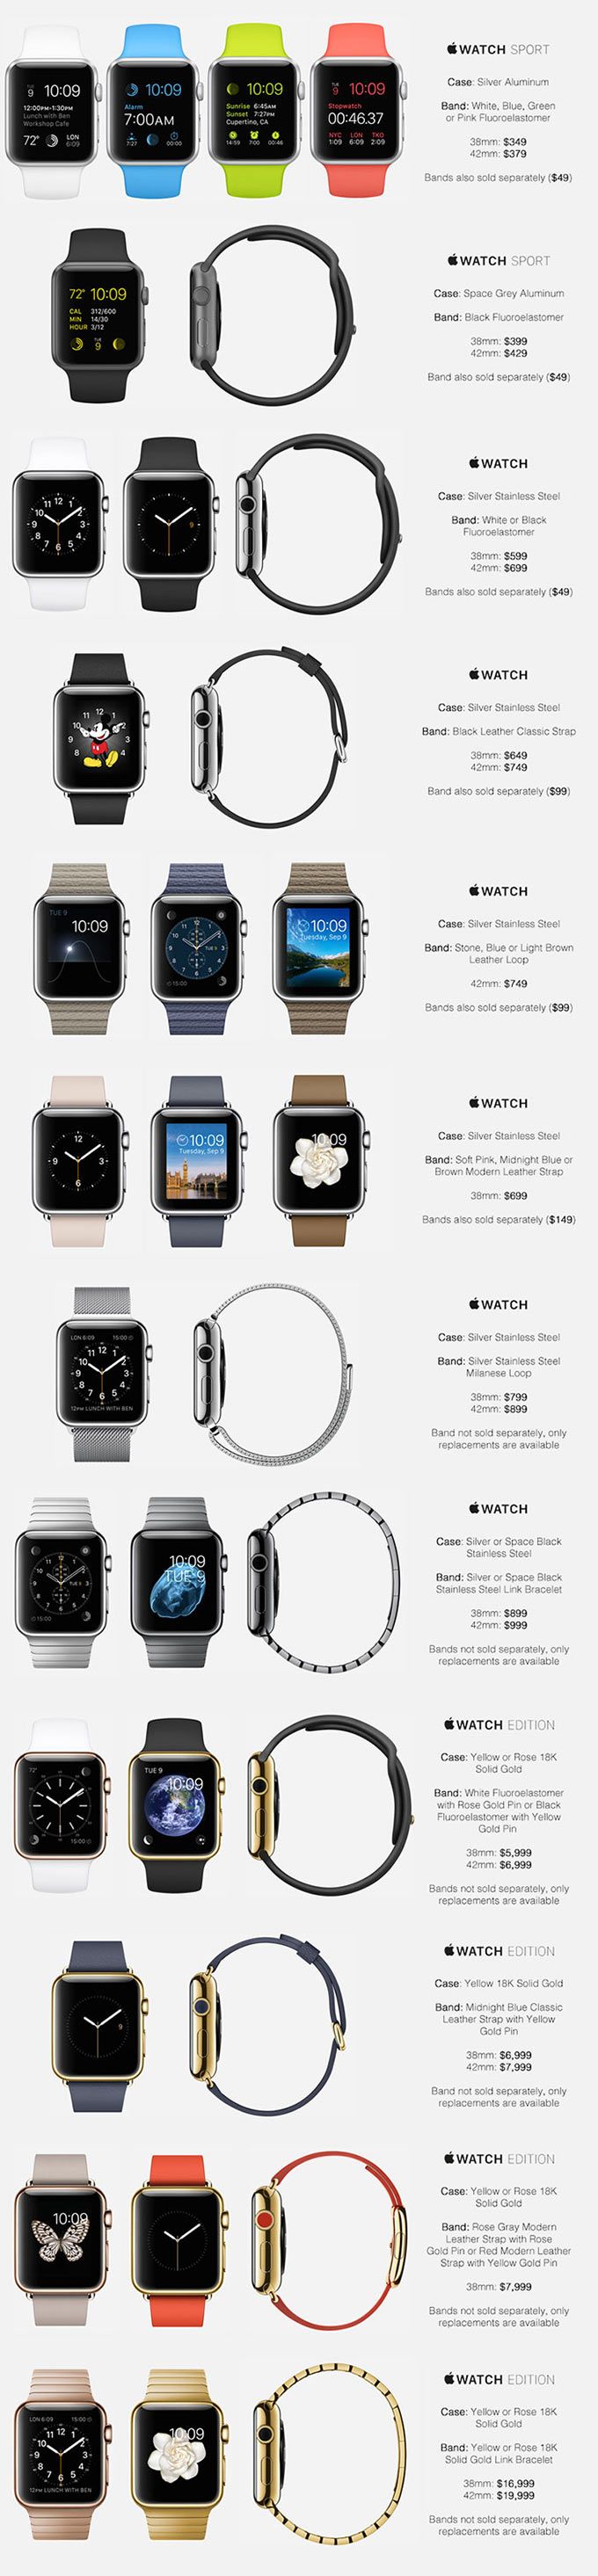 Became known net prices for all new versions of Apple Watch